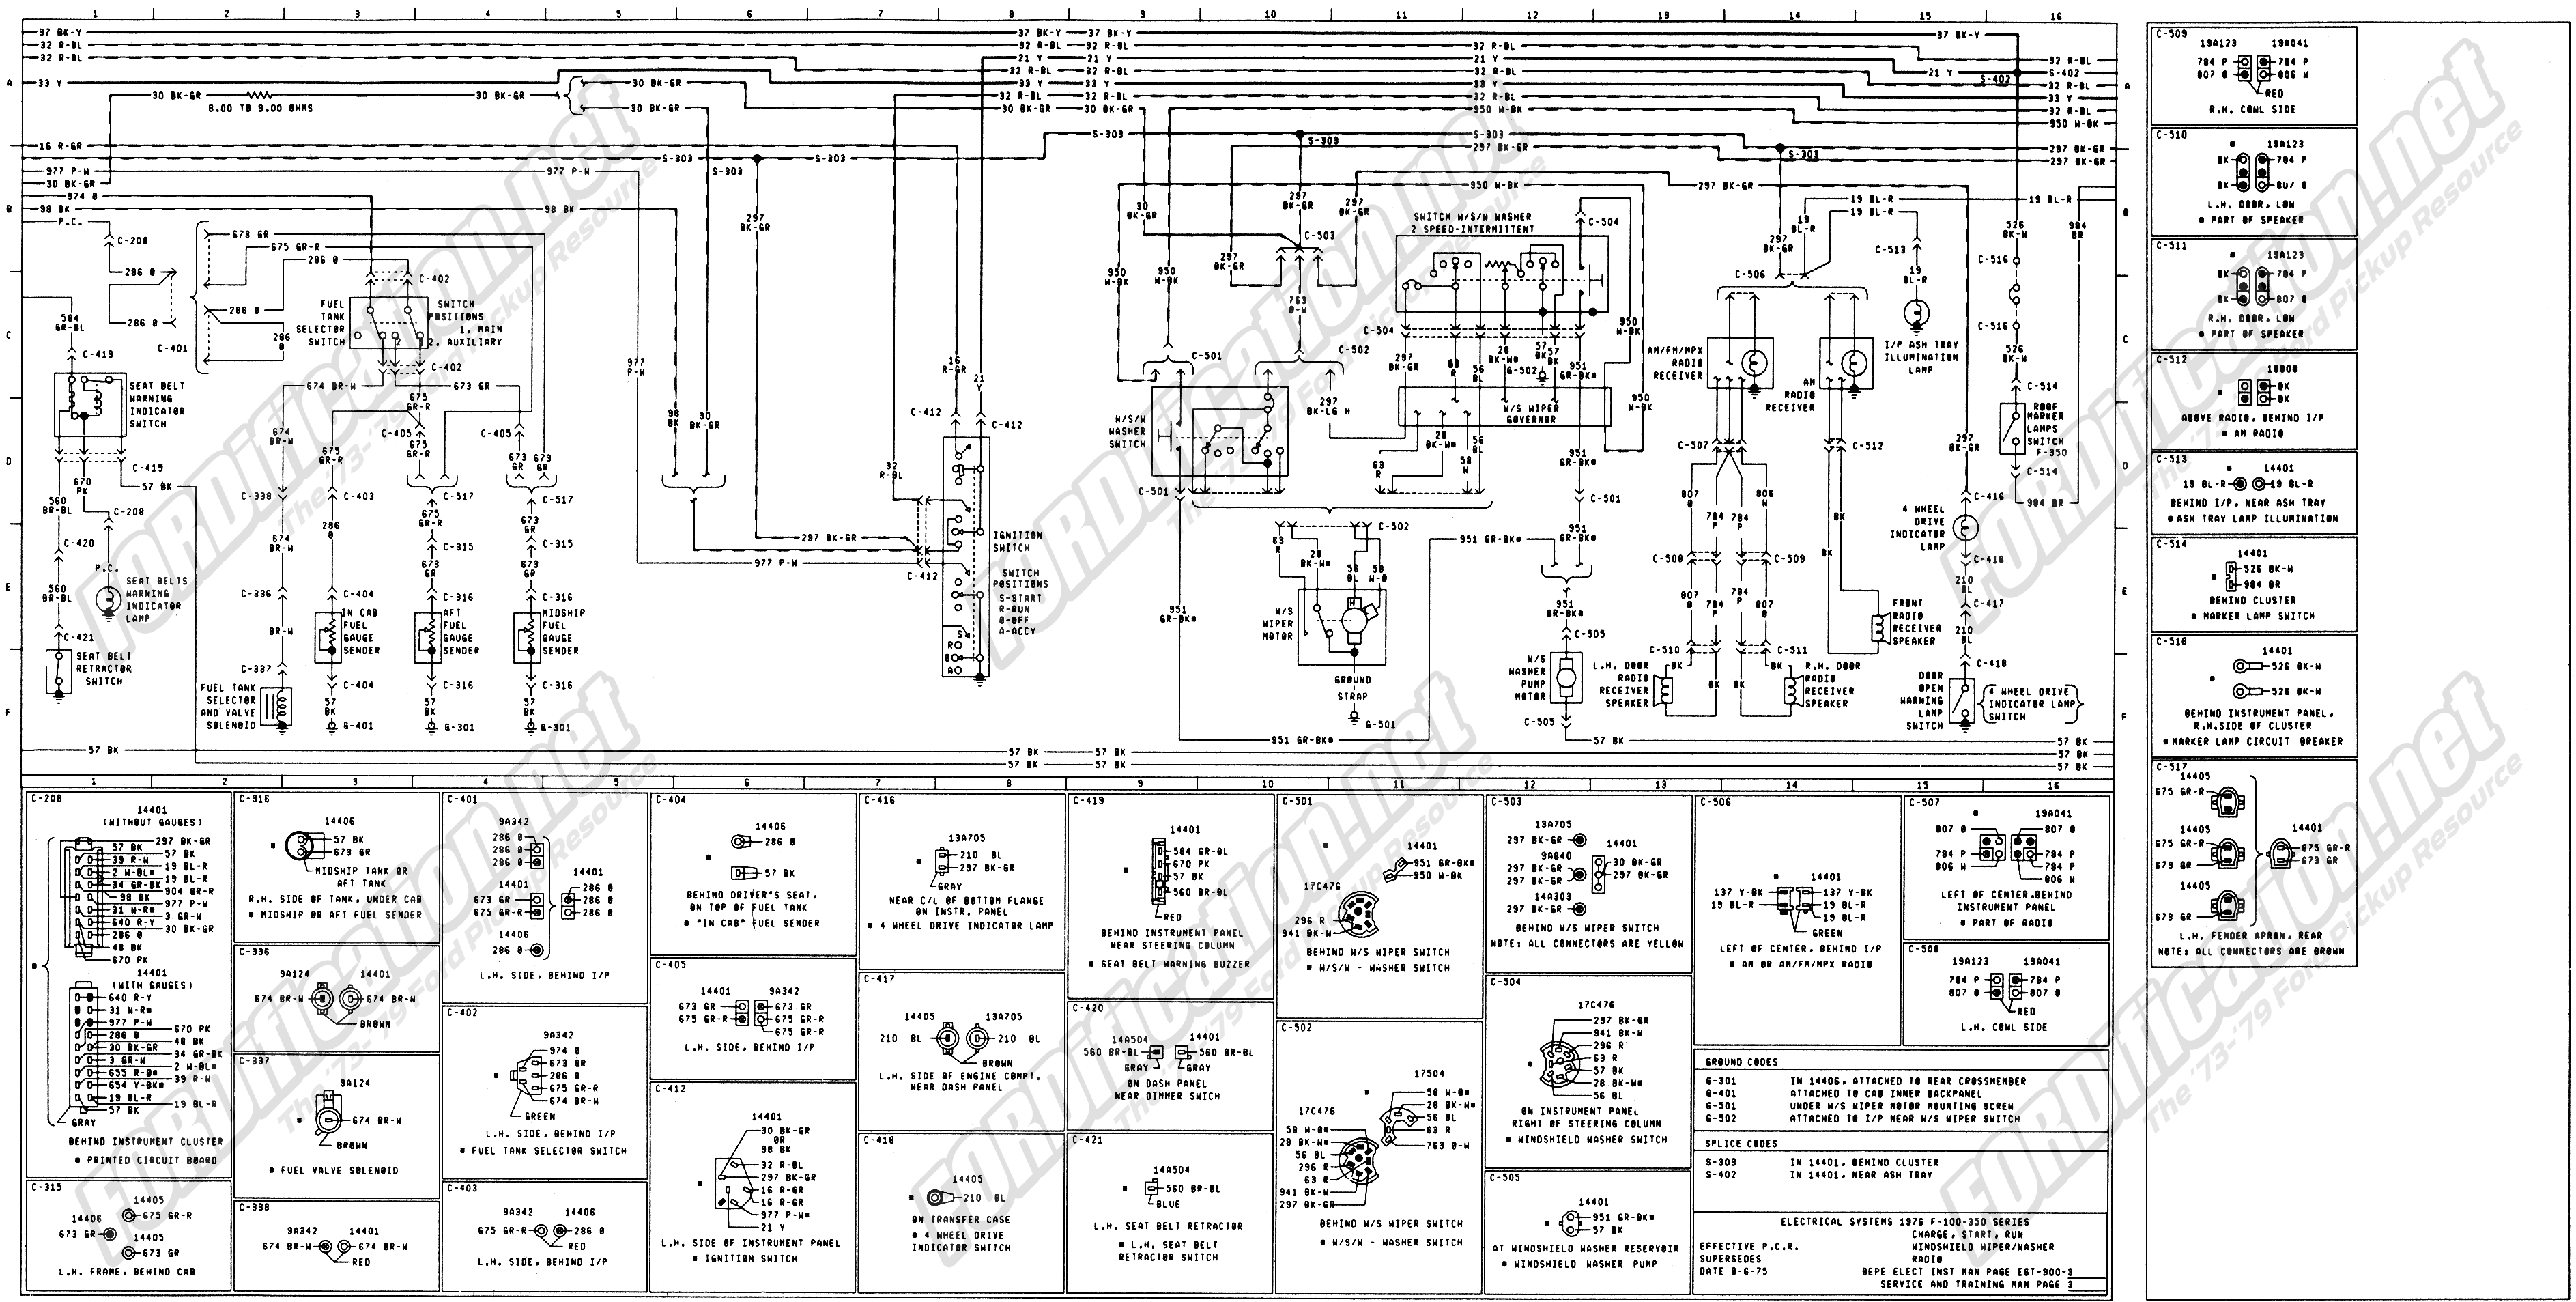 1973 1979 ford truck wiring diagrams schematics fordification net 1975 ford f100 ignition switch wiring diagram 1975 ford f100 electrical diagram